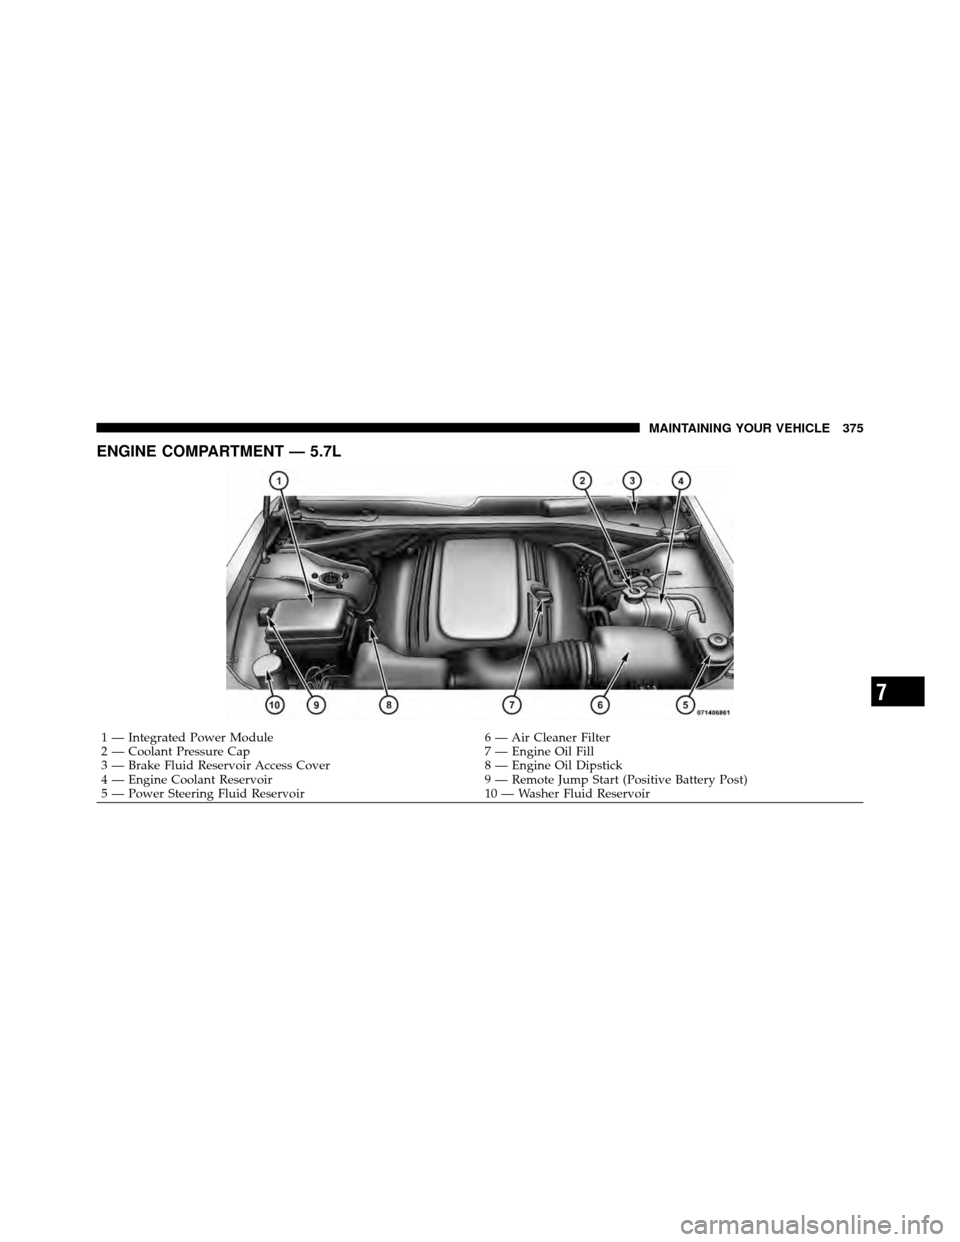 DODGE CHARGER 2010 7.G Owners Manual ENGINE COMPARTMENT — 5.7L
1 — Integrated Power Module6 — Air Cleaner Filter
2 — Coolant Pressure Cap 7 — Engine Oil Fill
3 — Brake Fluid Reservoir Access Cover 8 — Engine Oil Dipstick
4 